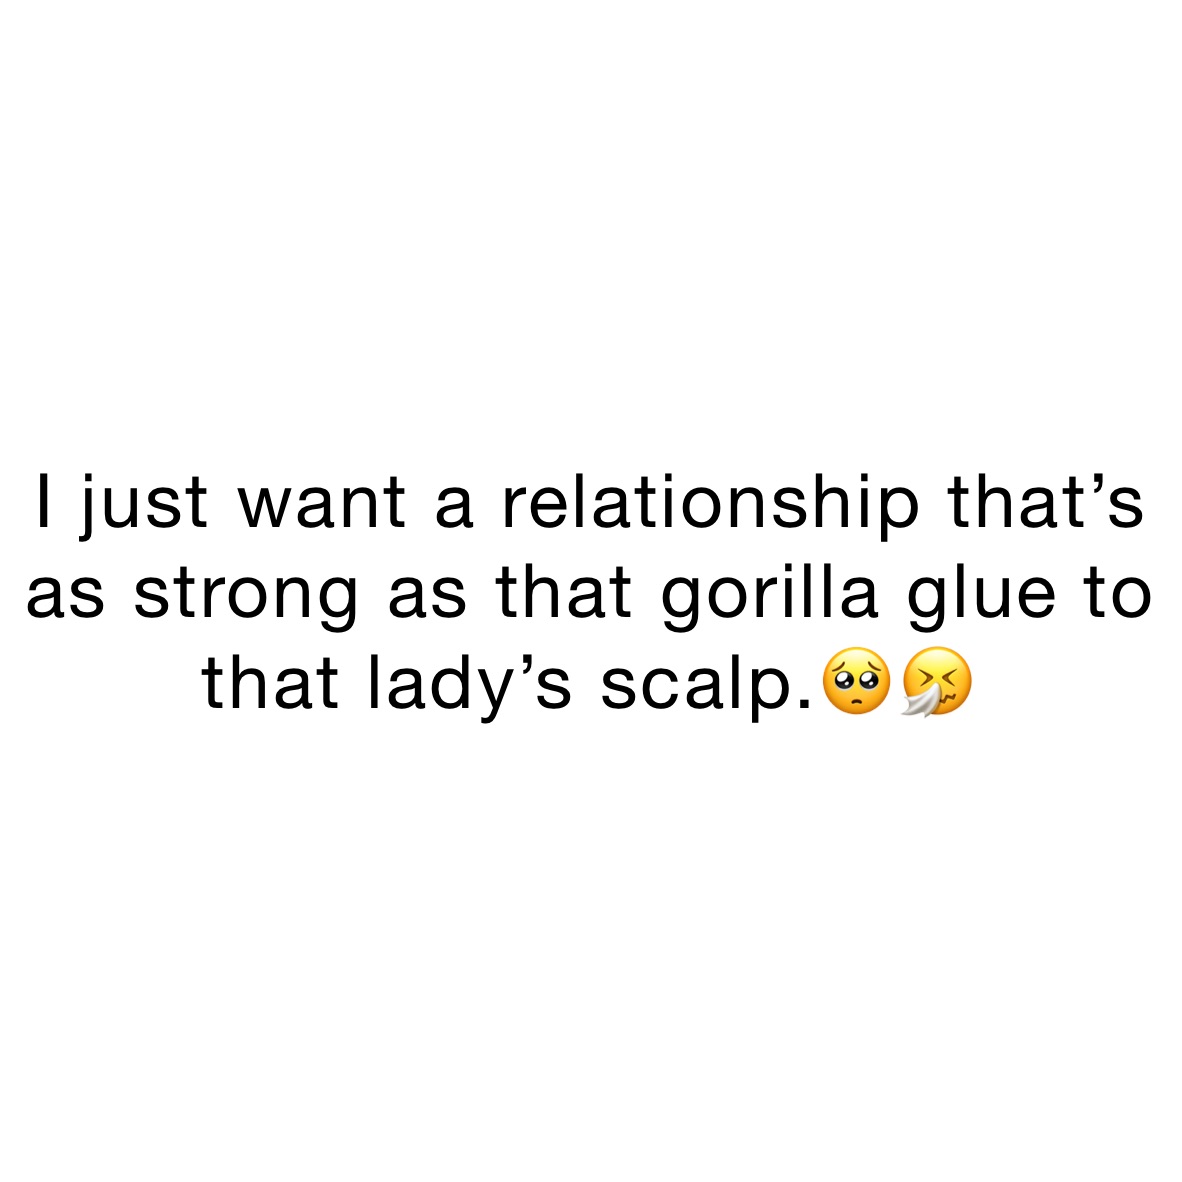 I just want a relationship that’s as strong as that gorilla glue to that lady’s scalp.🥺🤧